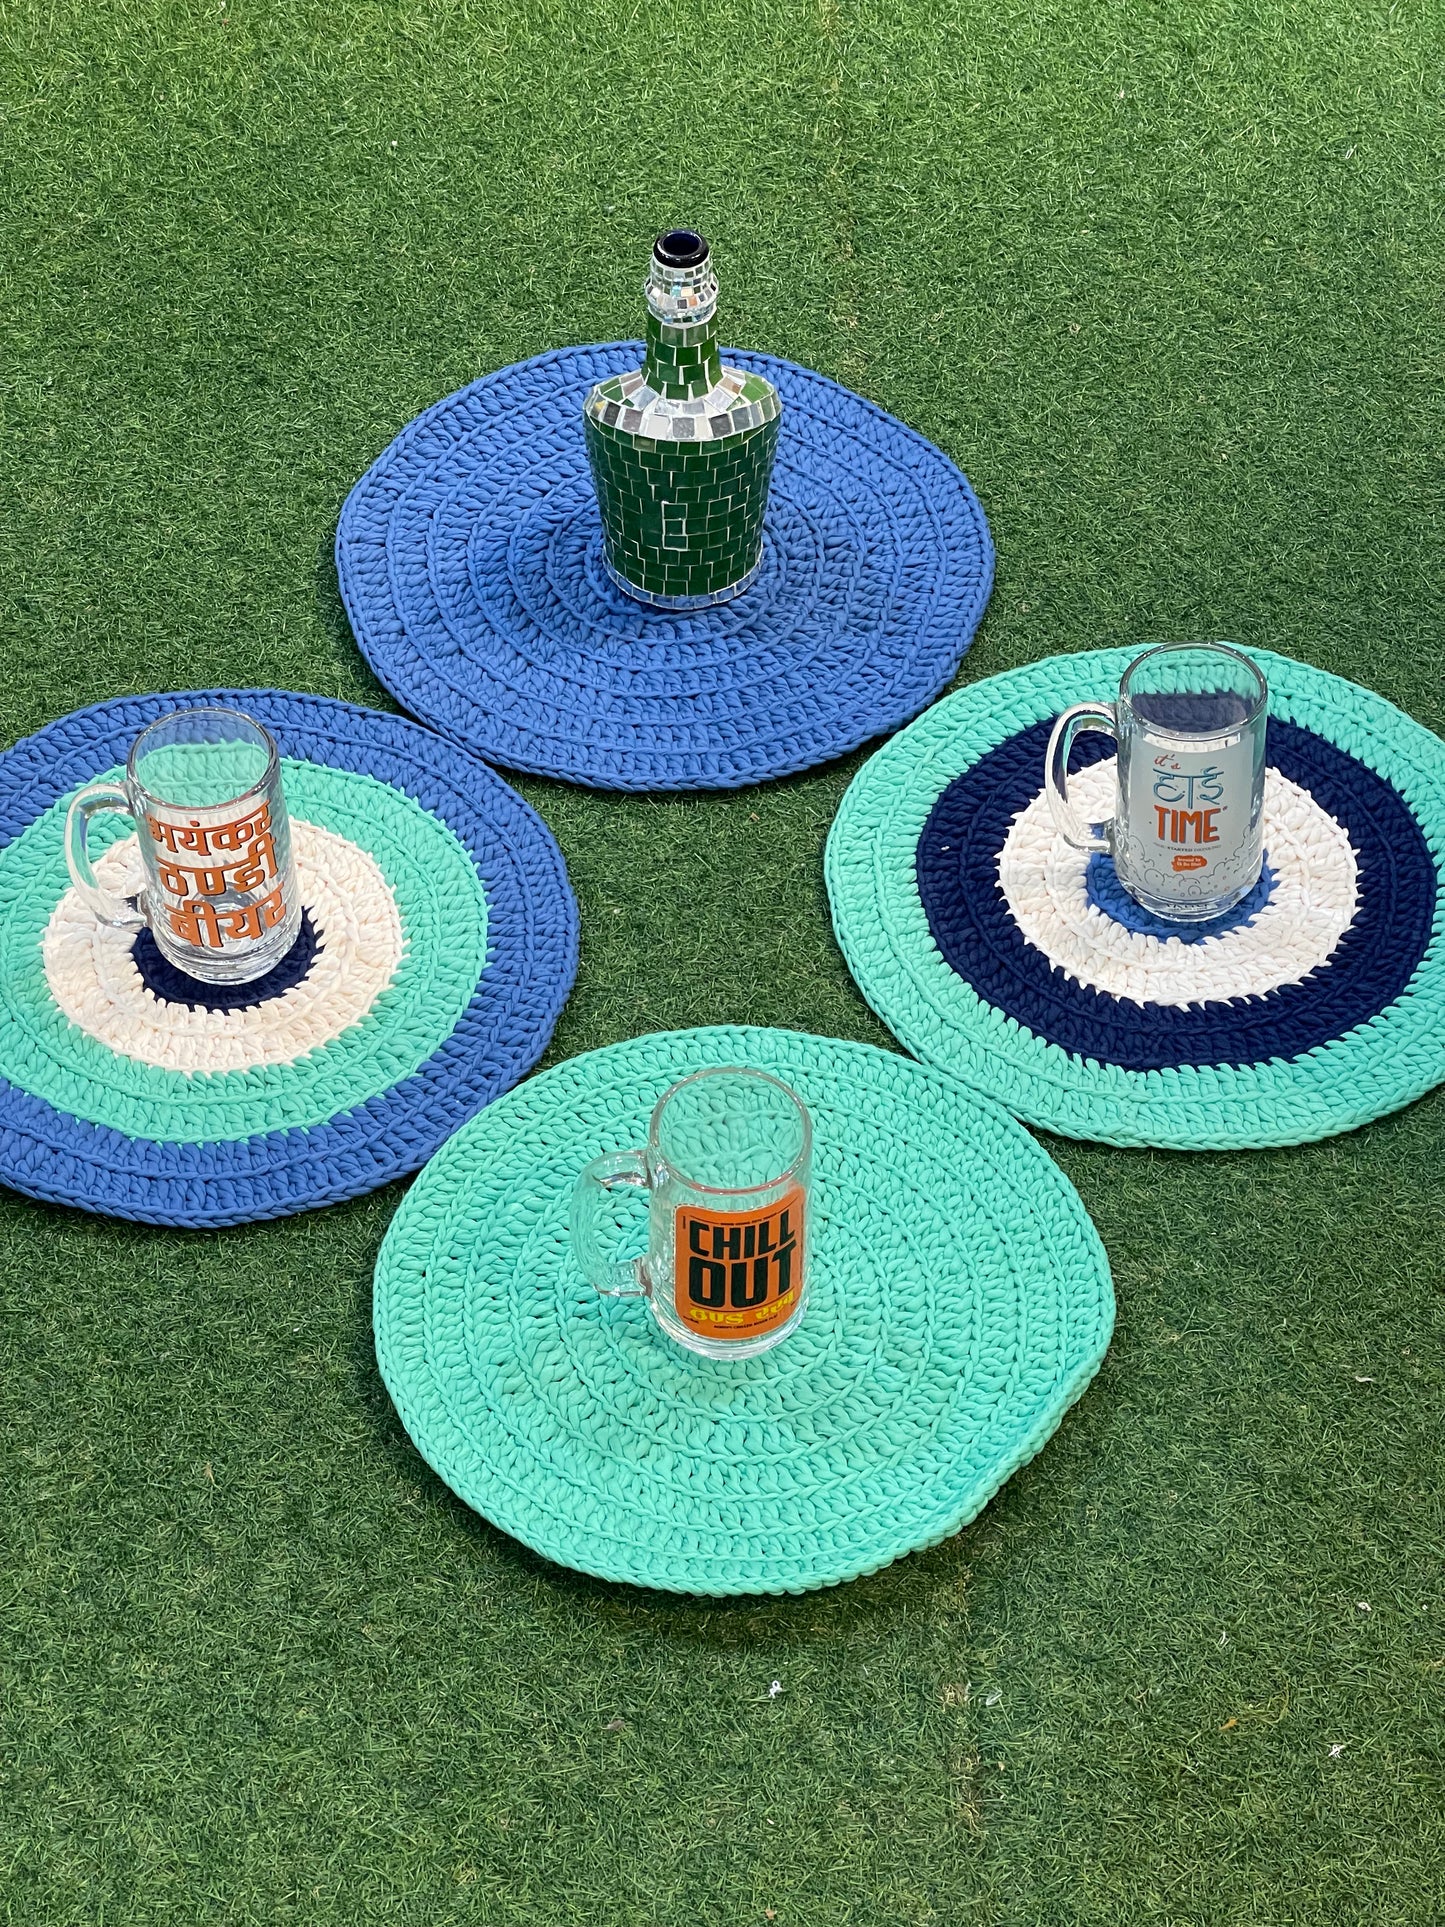 Set of 4 Green, blue and white handwoven upcycled knitted cotton place mats